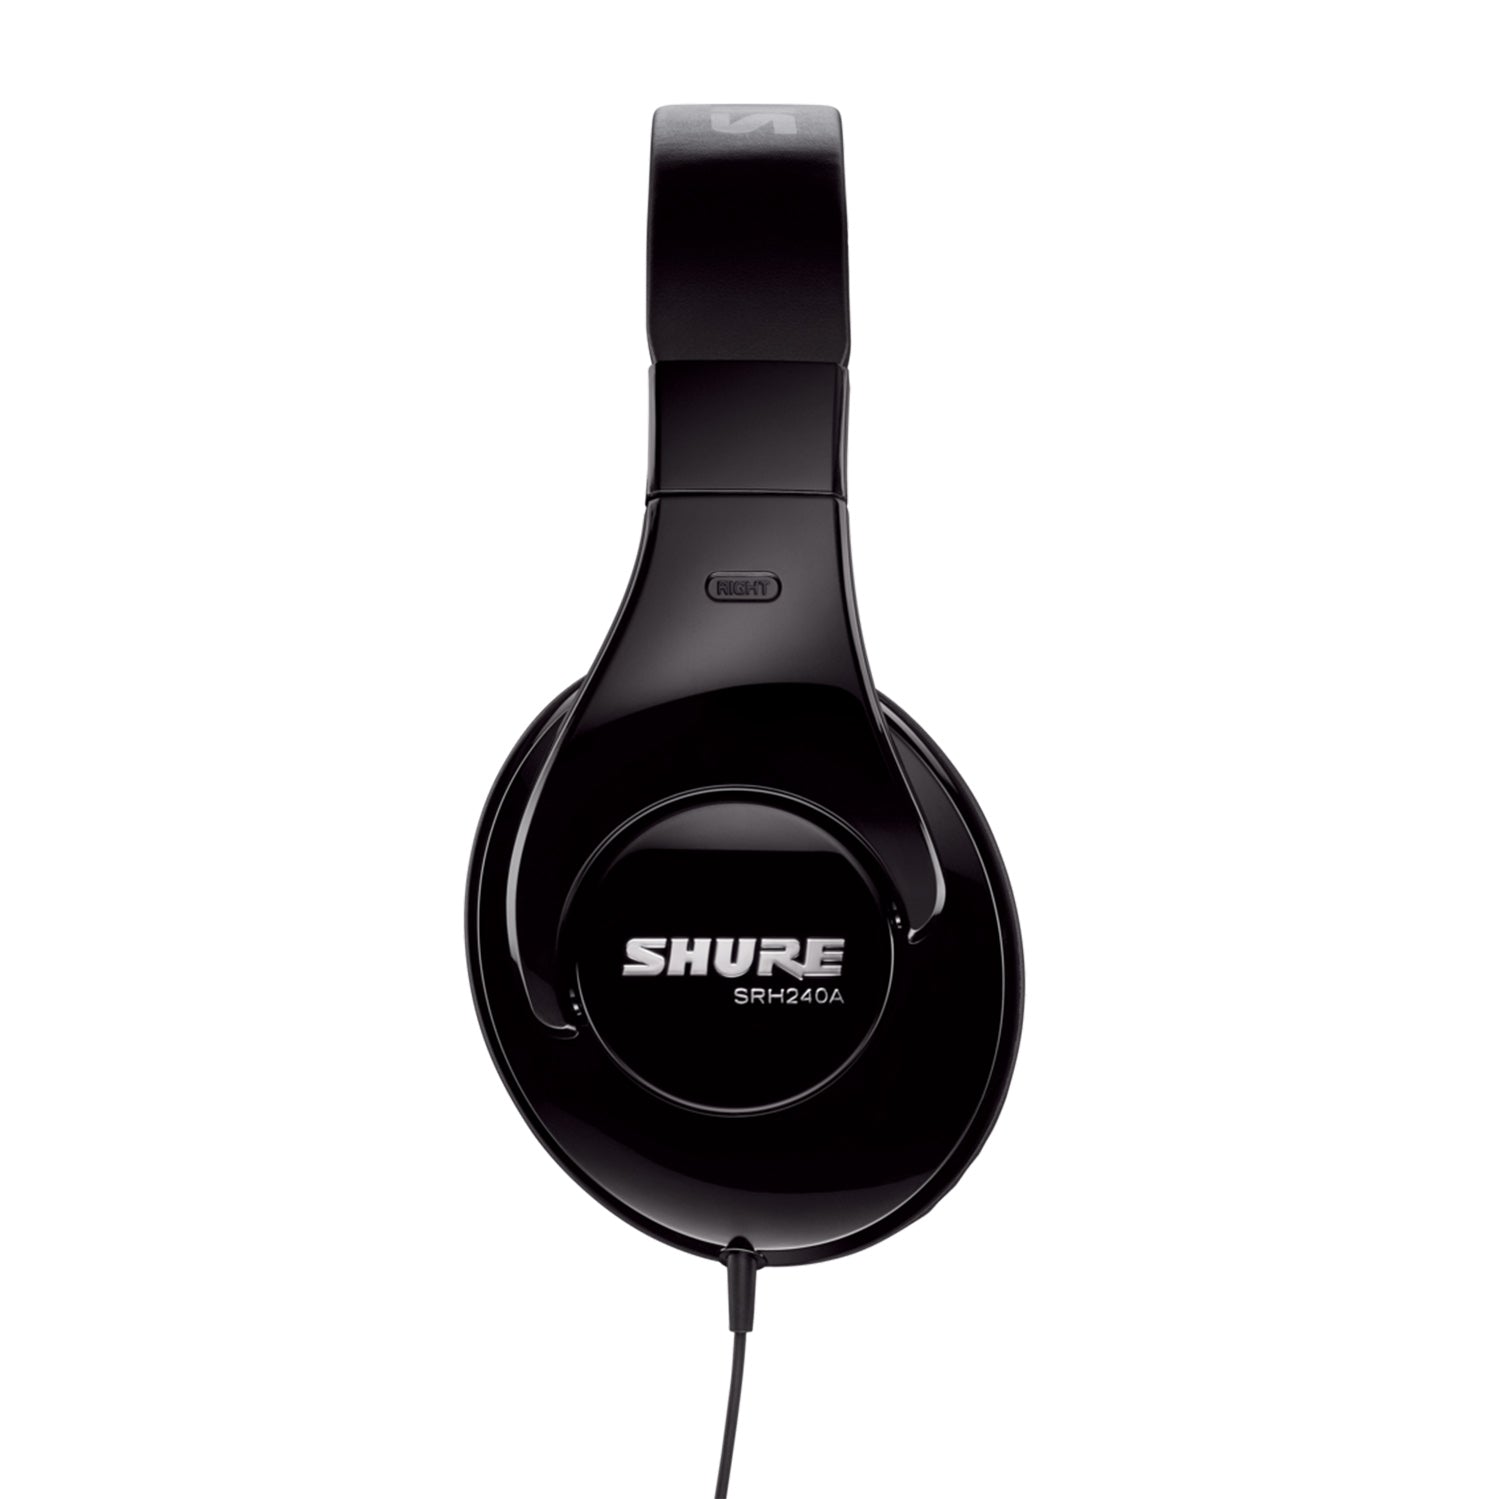 Open Box: Shure Mobile Recording Kit With SRH240A Headphones and MV5 Microphone Including Lightning and USB Cables - Hollywood DJ